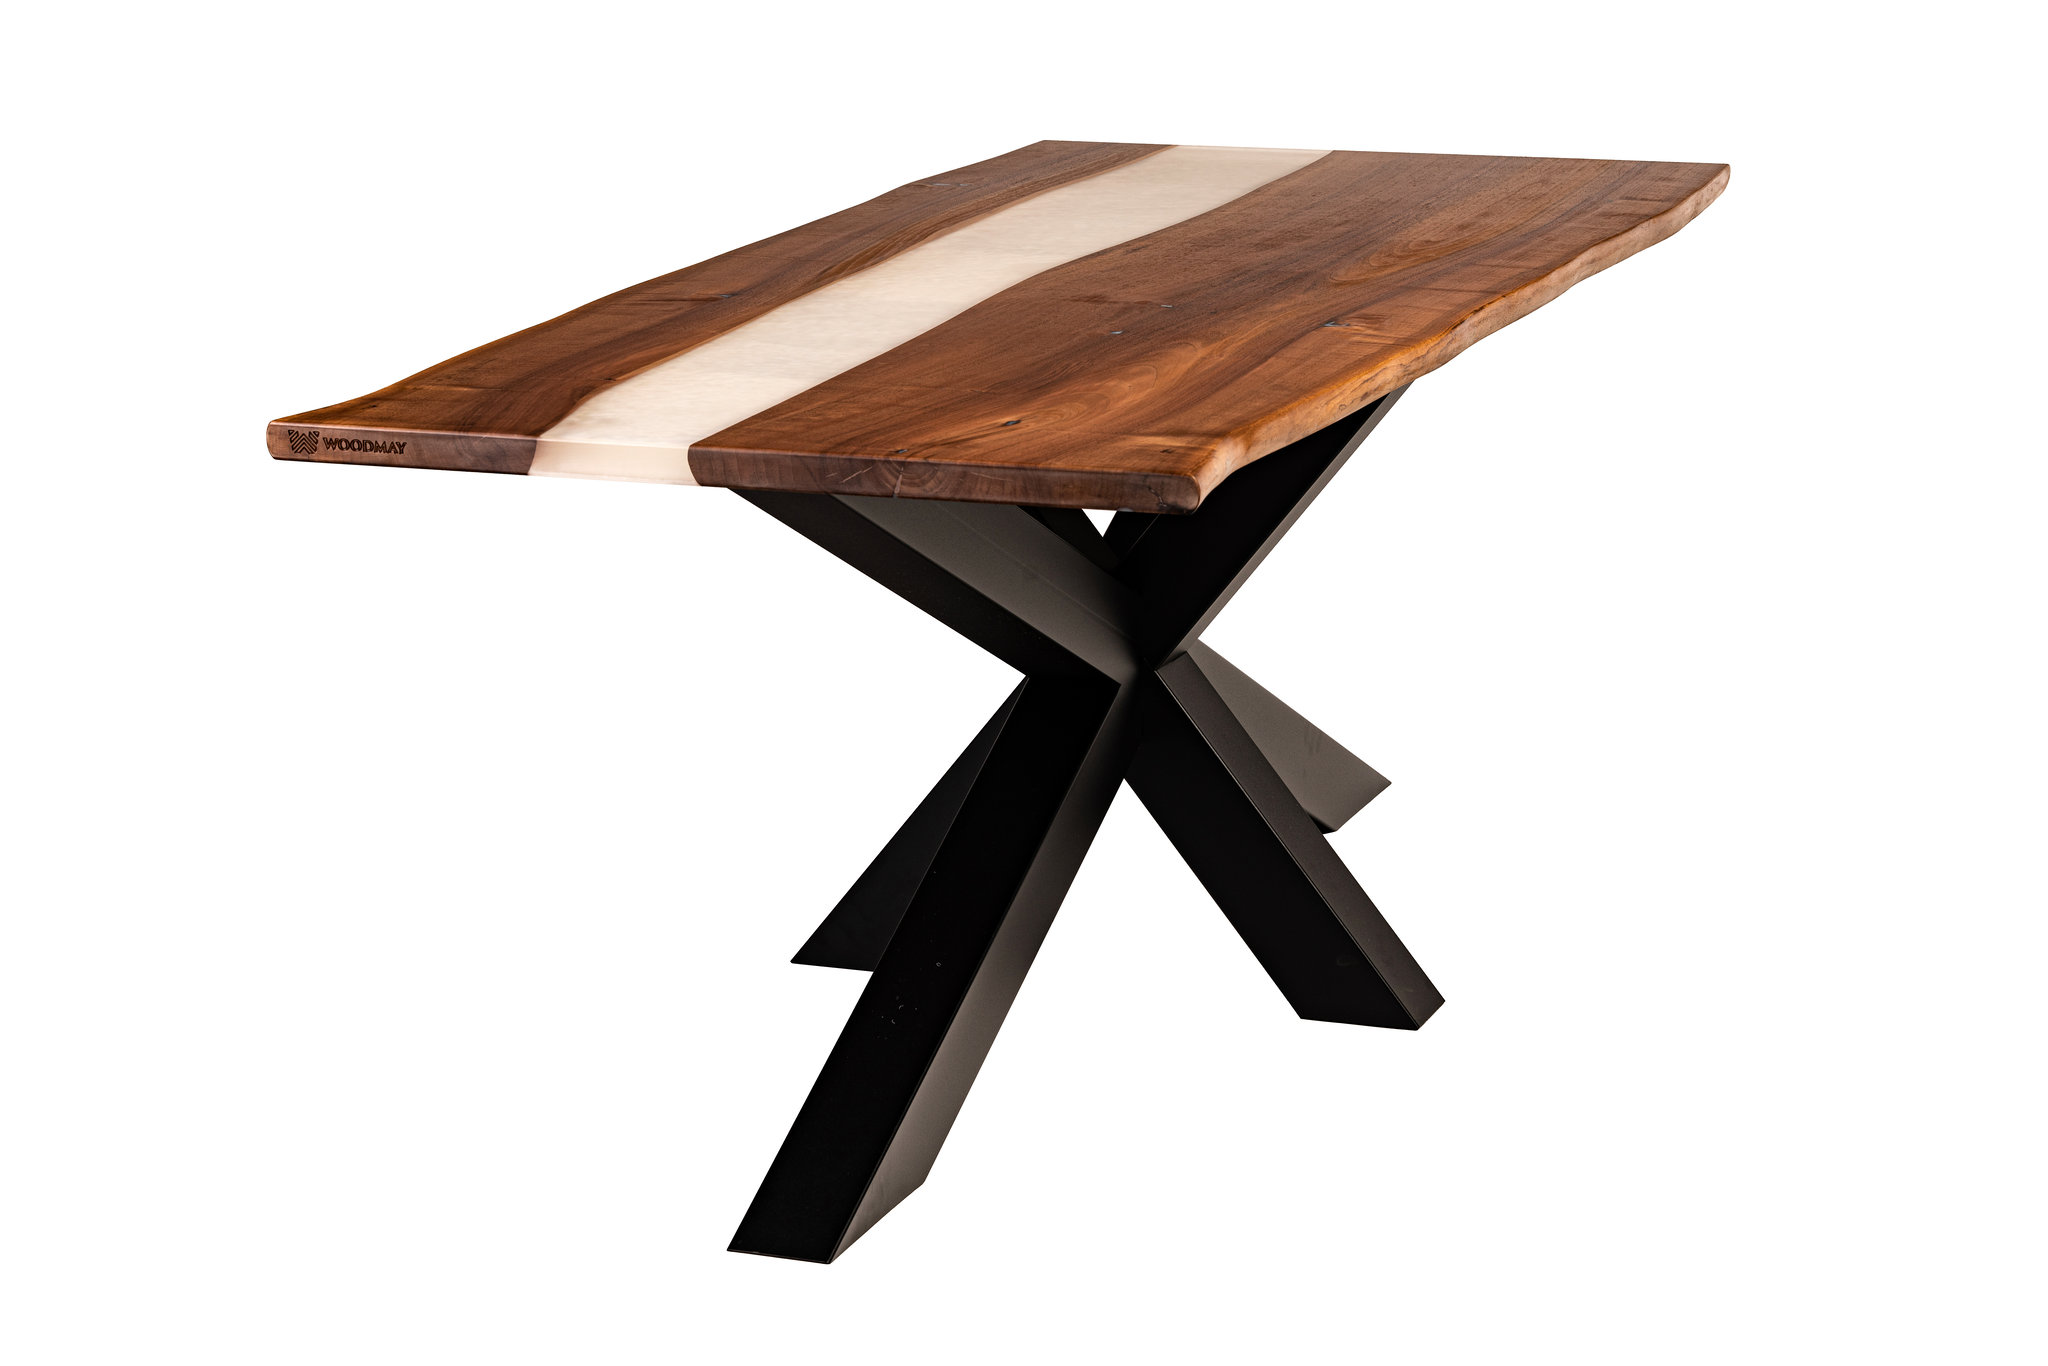 Anemoi dining table in solid walnut with white epoxy resin.